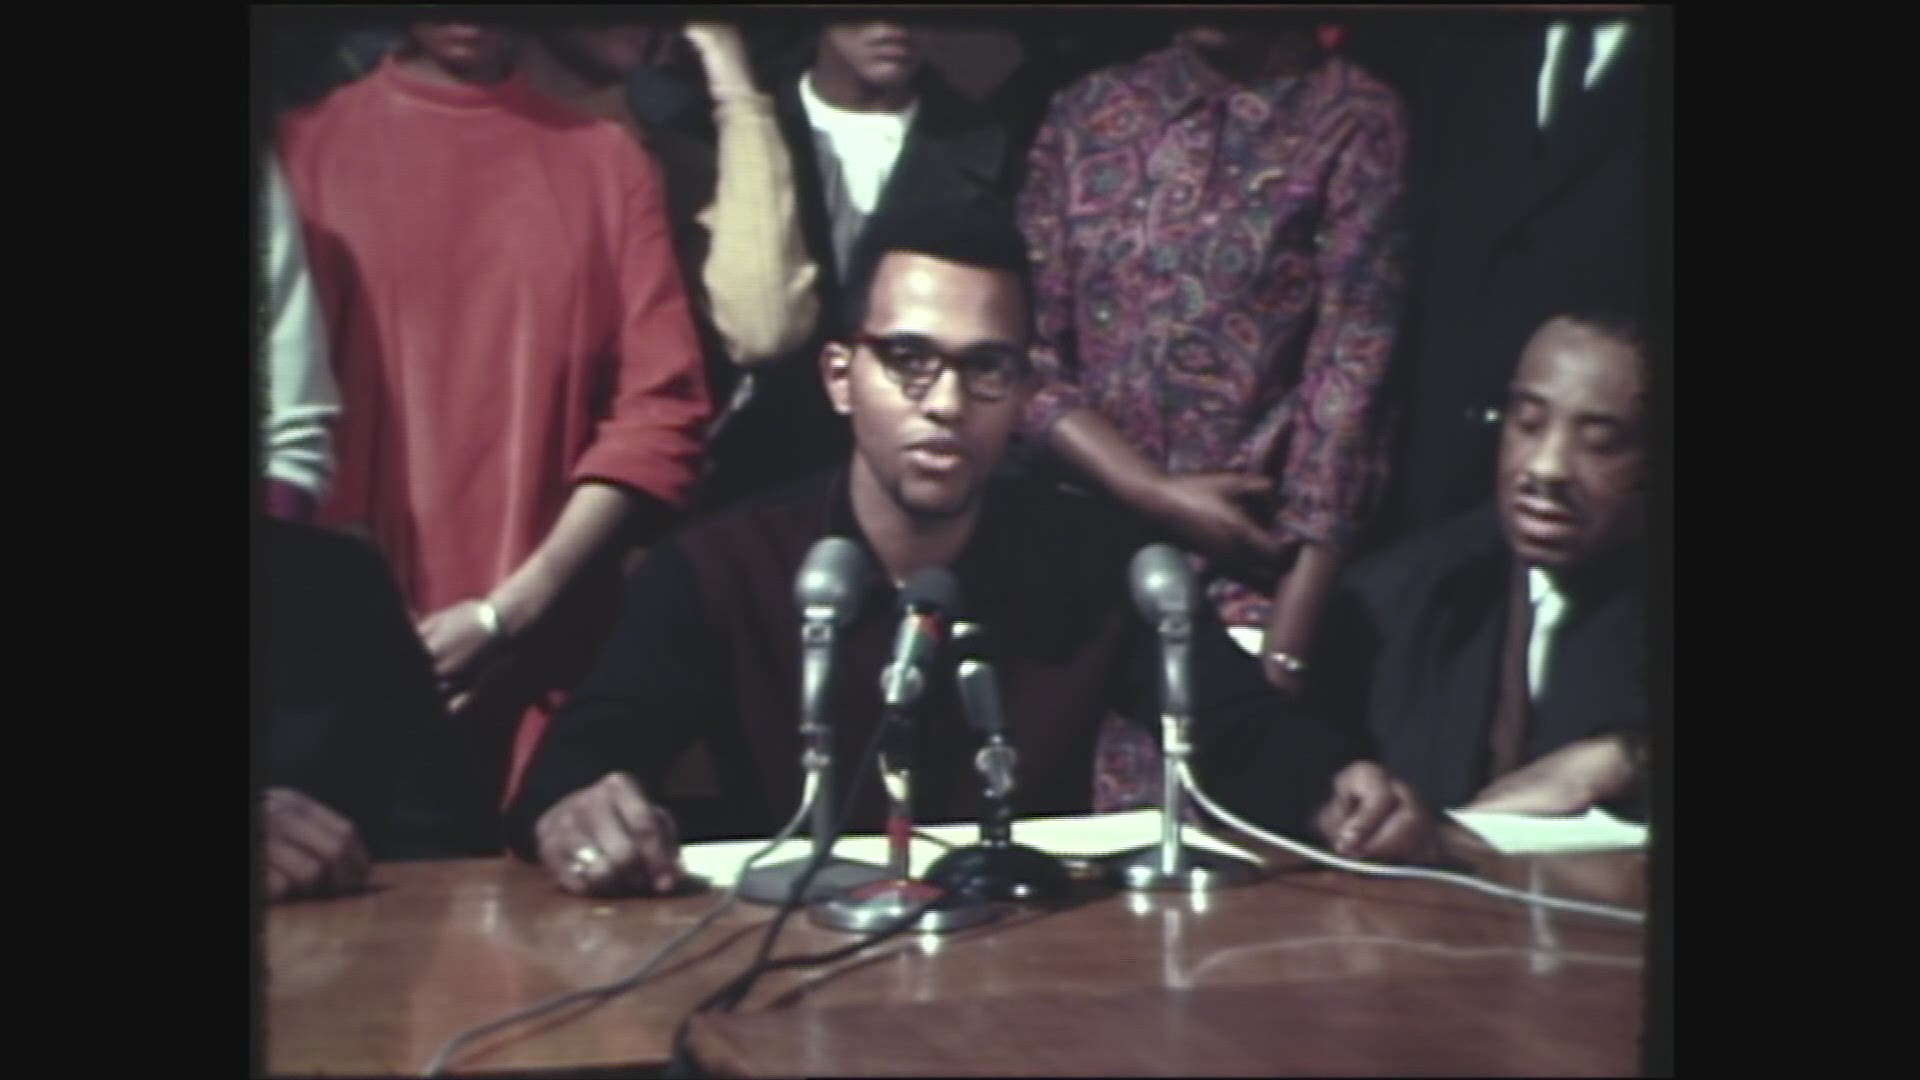 Archive video shows demonstrations, speeches following the death of civil rights activist Martin Luther King, Jr.